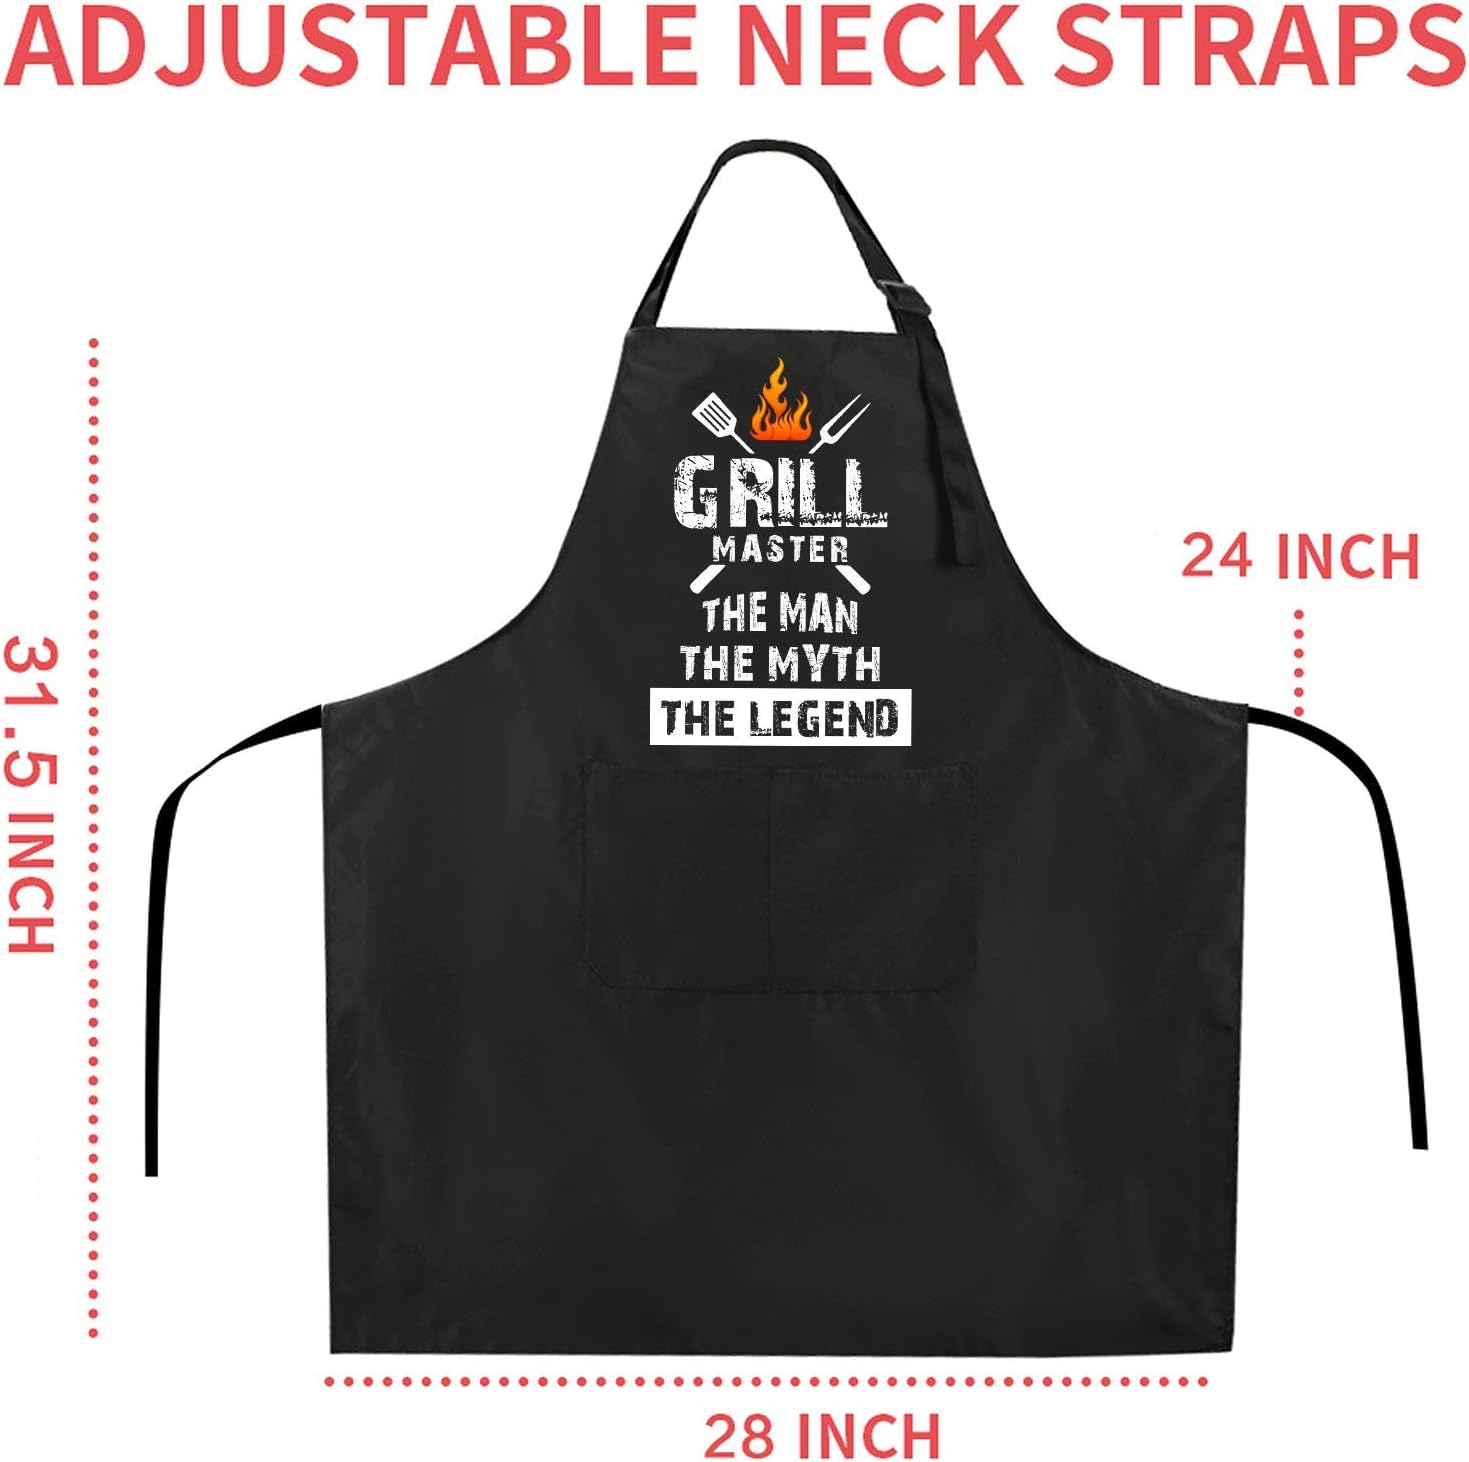 Rosoz Funny BBQ Black Chef Aprons for Men, Grill Master, Adjustable Kitchen Cooking Aprons with Pocket Waterproof Oil Proof Father s Day/Birthday - image 4 of 7